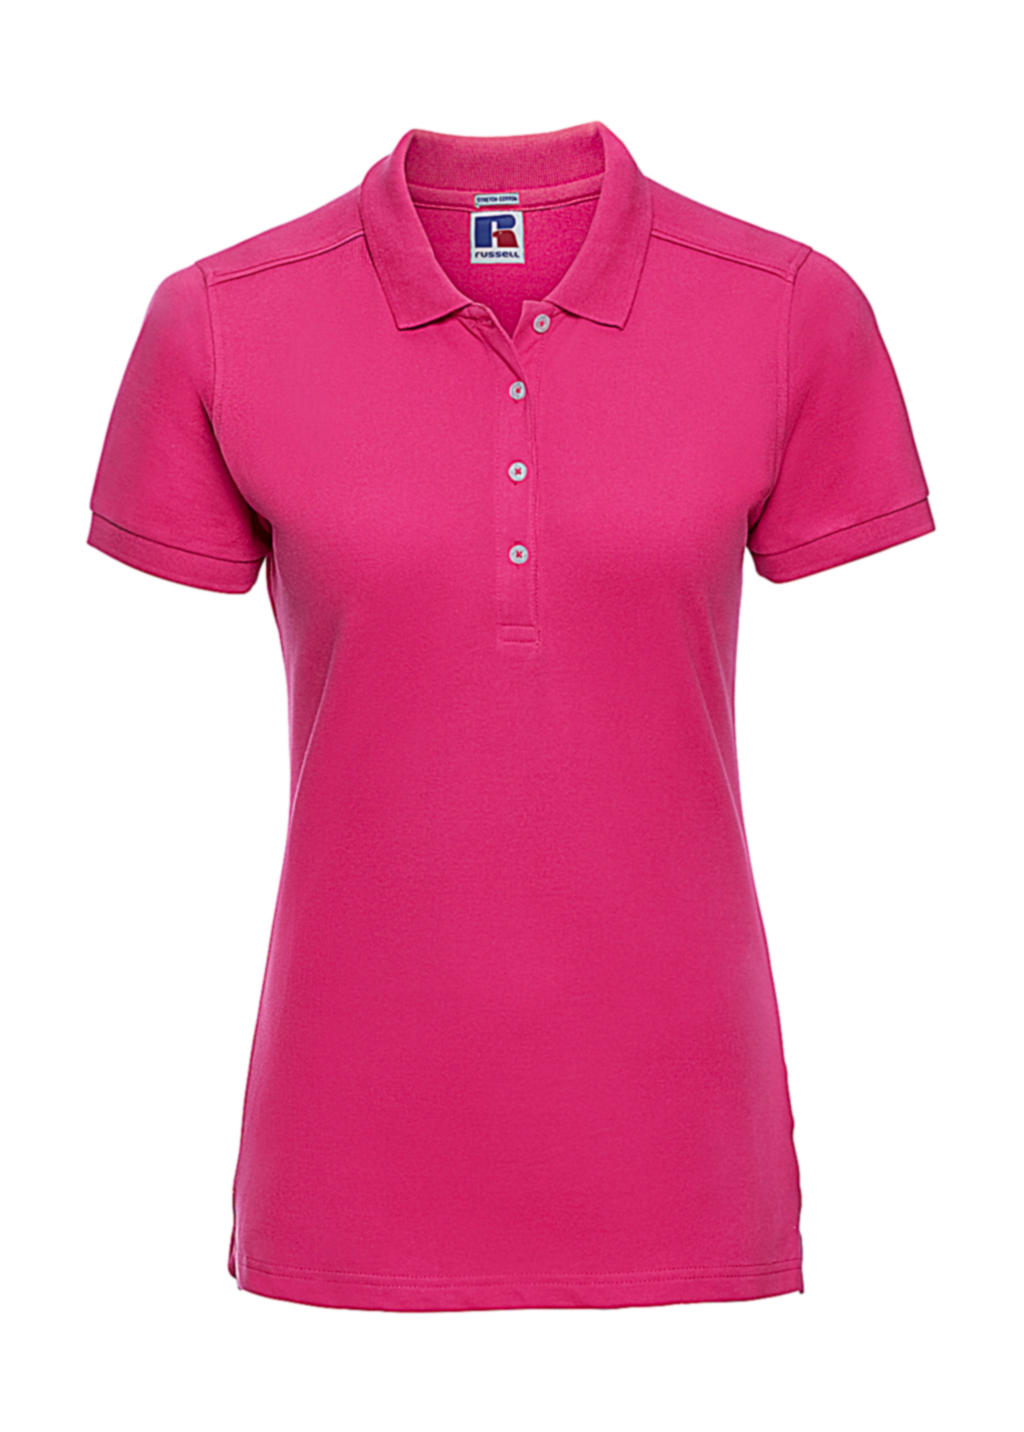  Ladies Fitted Stretch Polo in Farbe Fuchsia